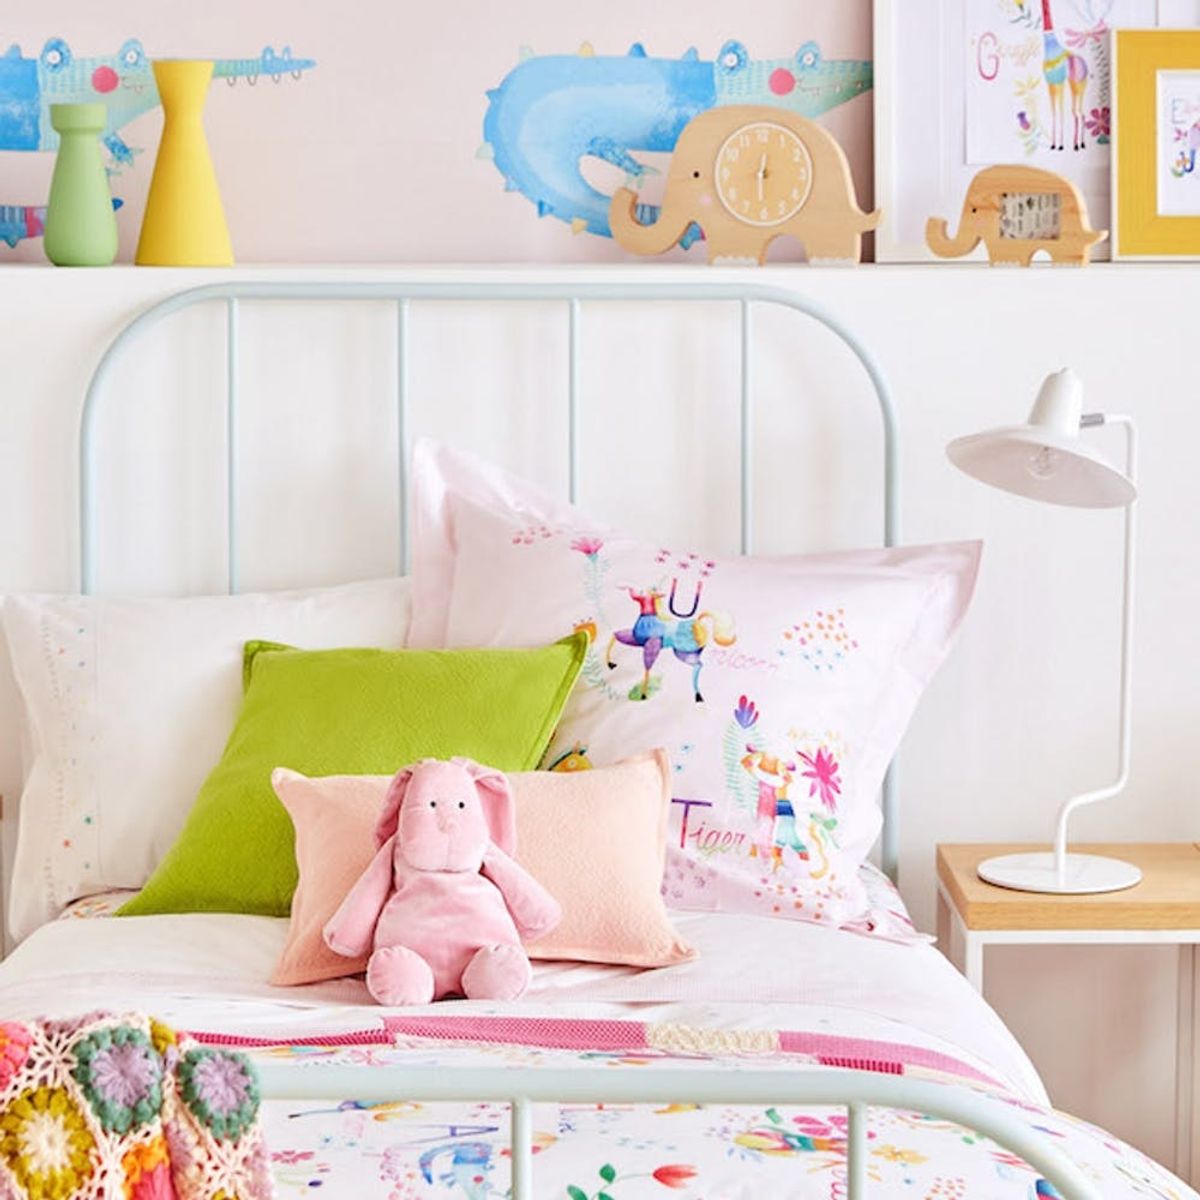 Zara’s New Kid’s Home Collection Is So Cute We Want It for Ourselves